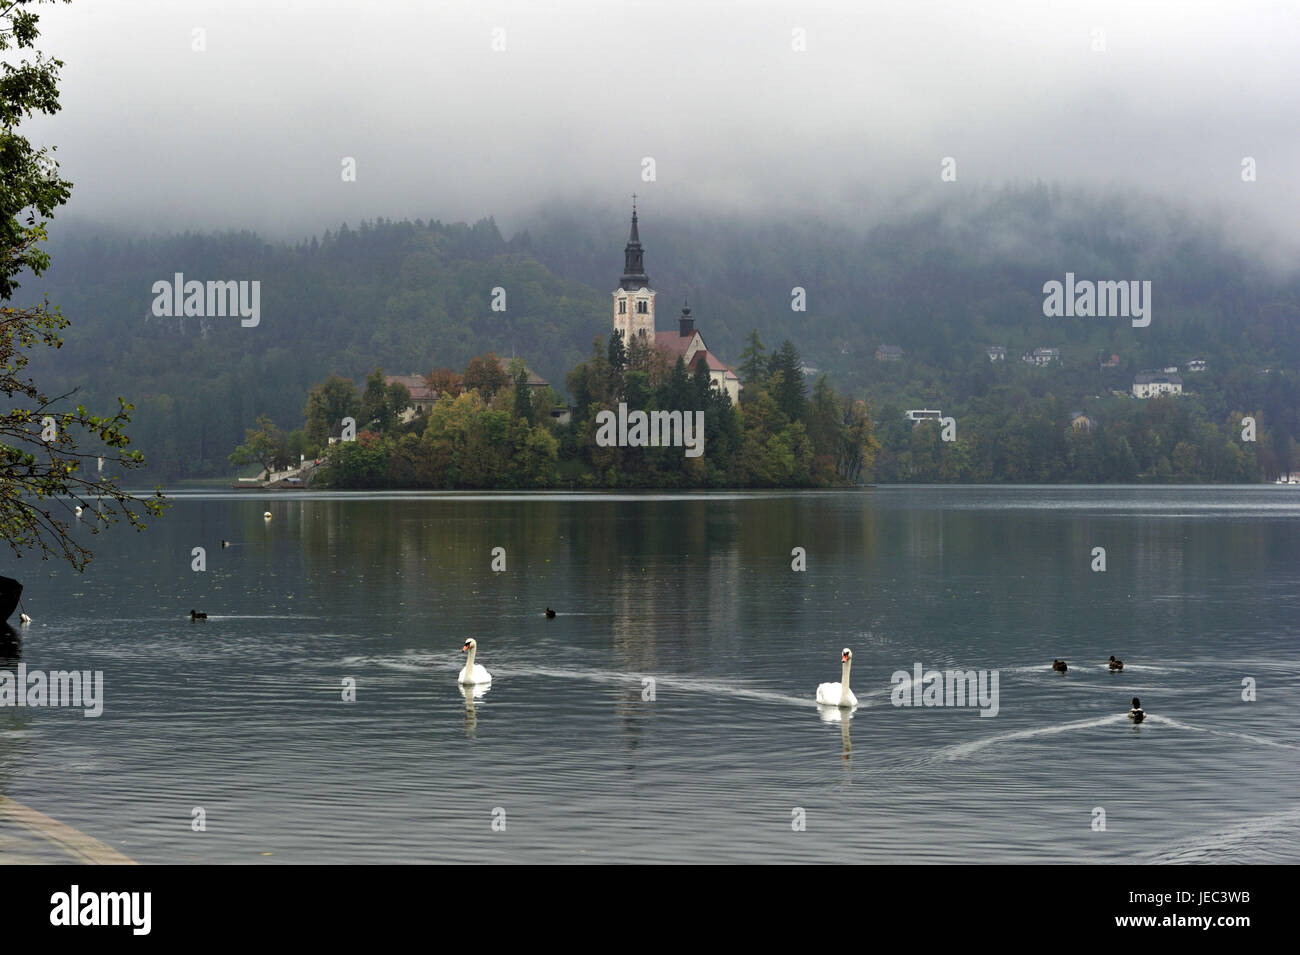 Slovenia, region of Gorenjska, Bled, Bleder lake, island with church, swans in the foreground, Stock Photo